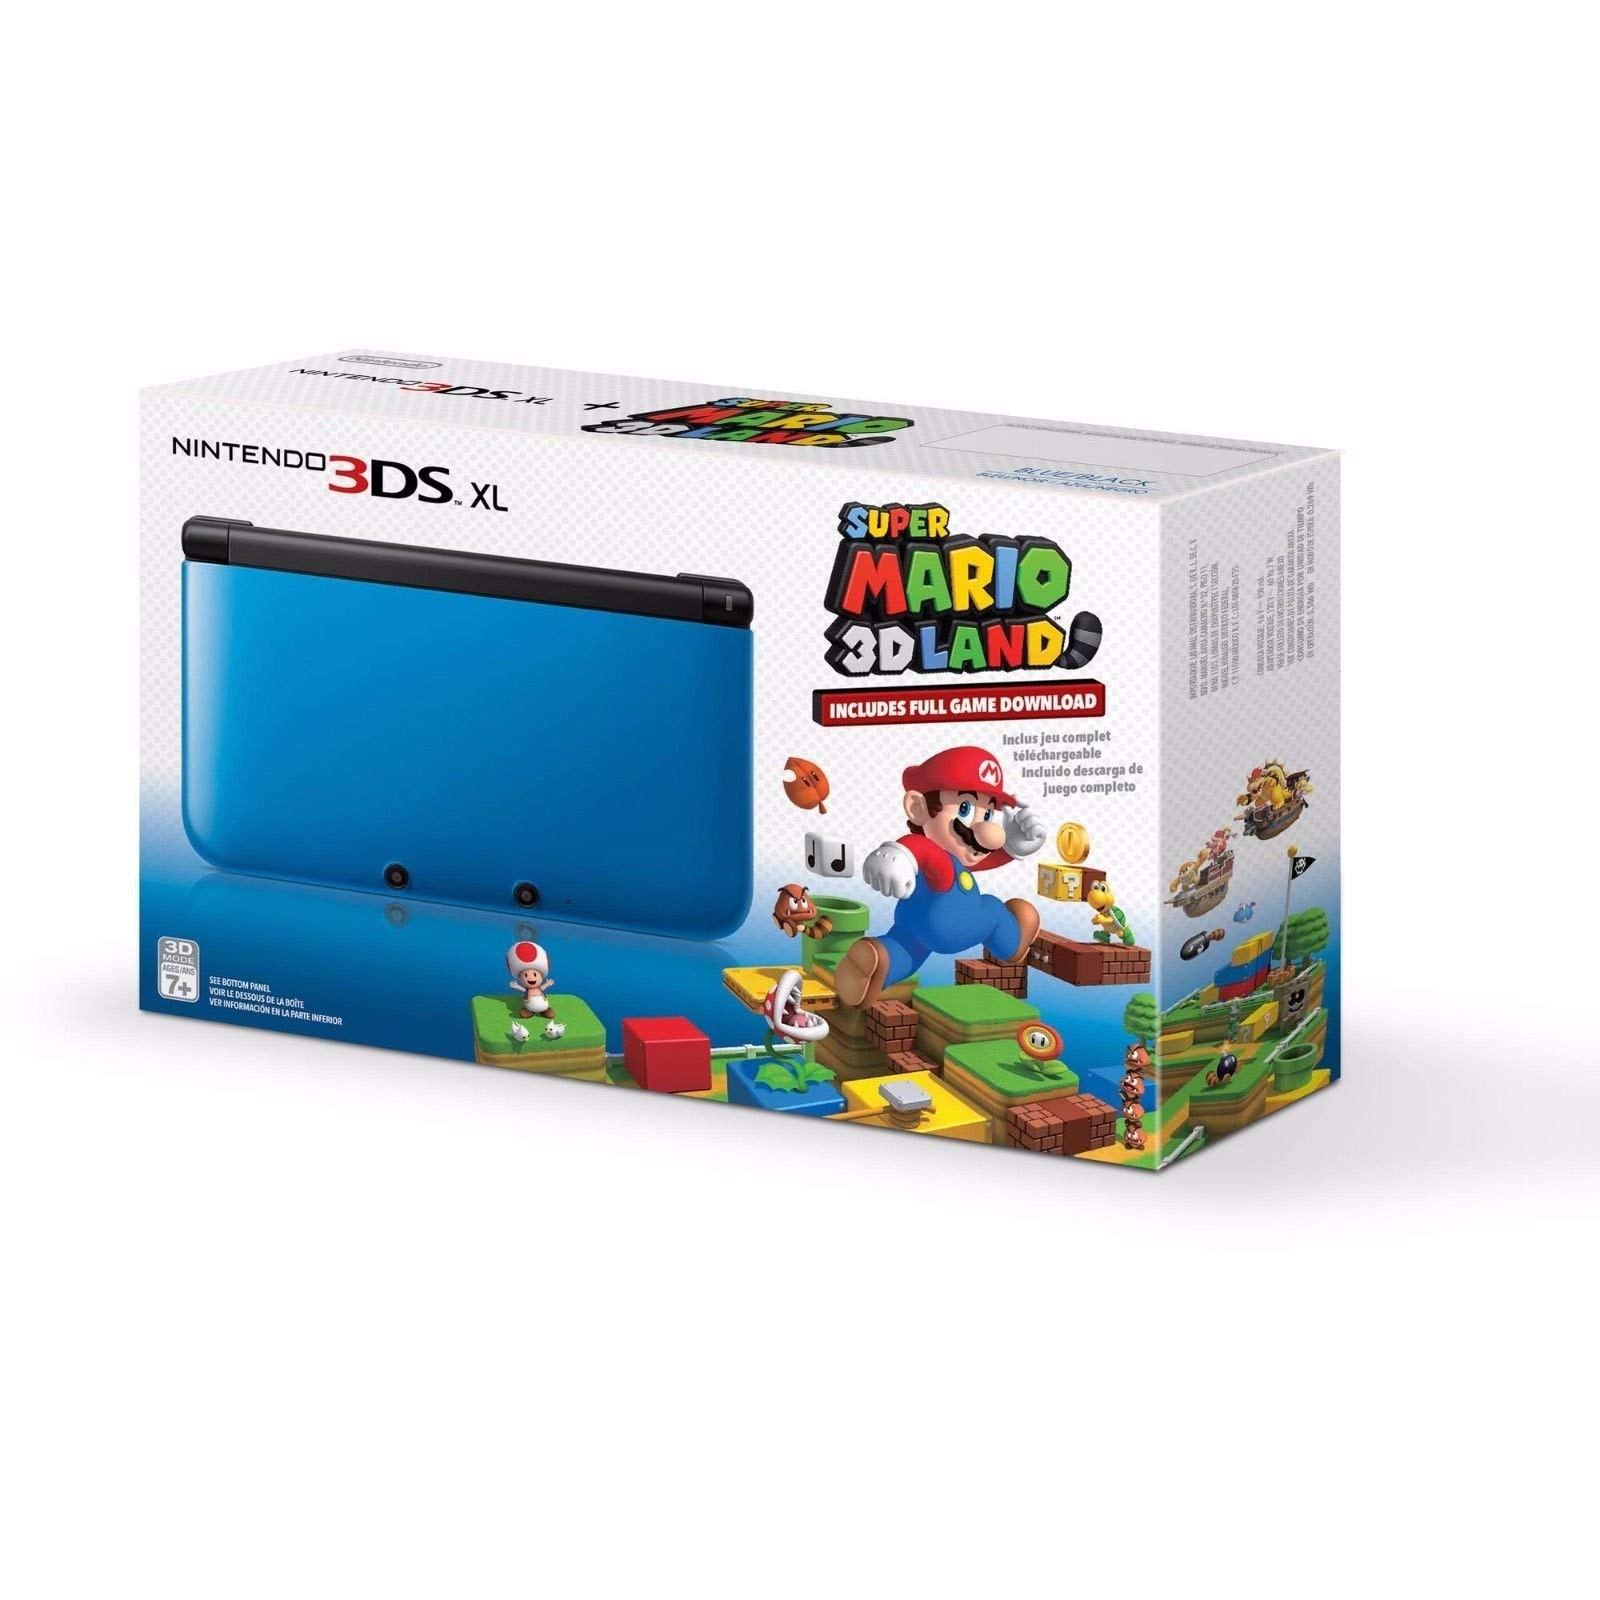 Nintendo 3DS XL Console with Super Mario 3D Blue (Renewed)